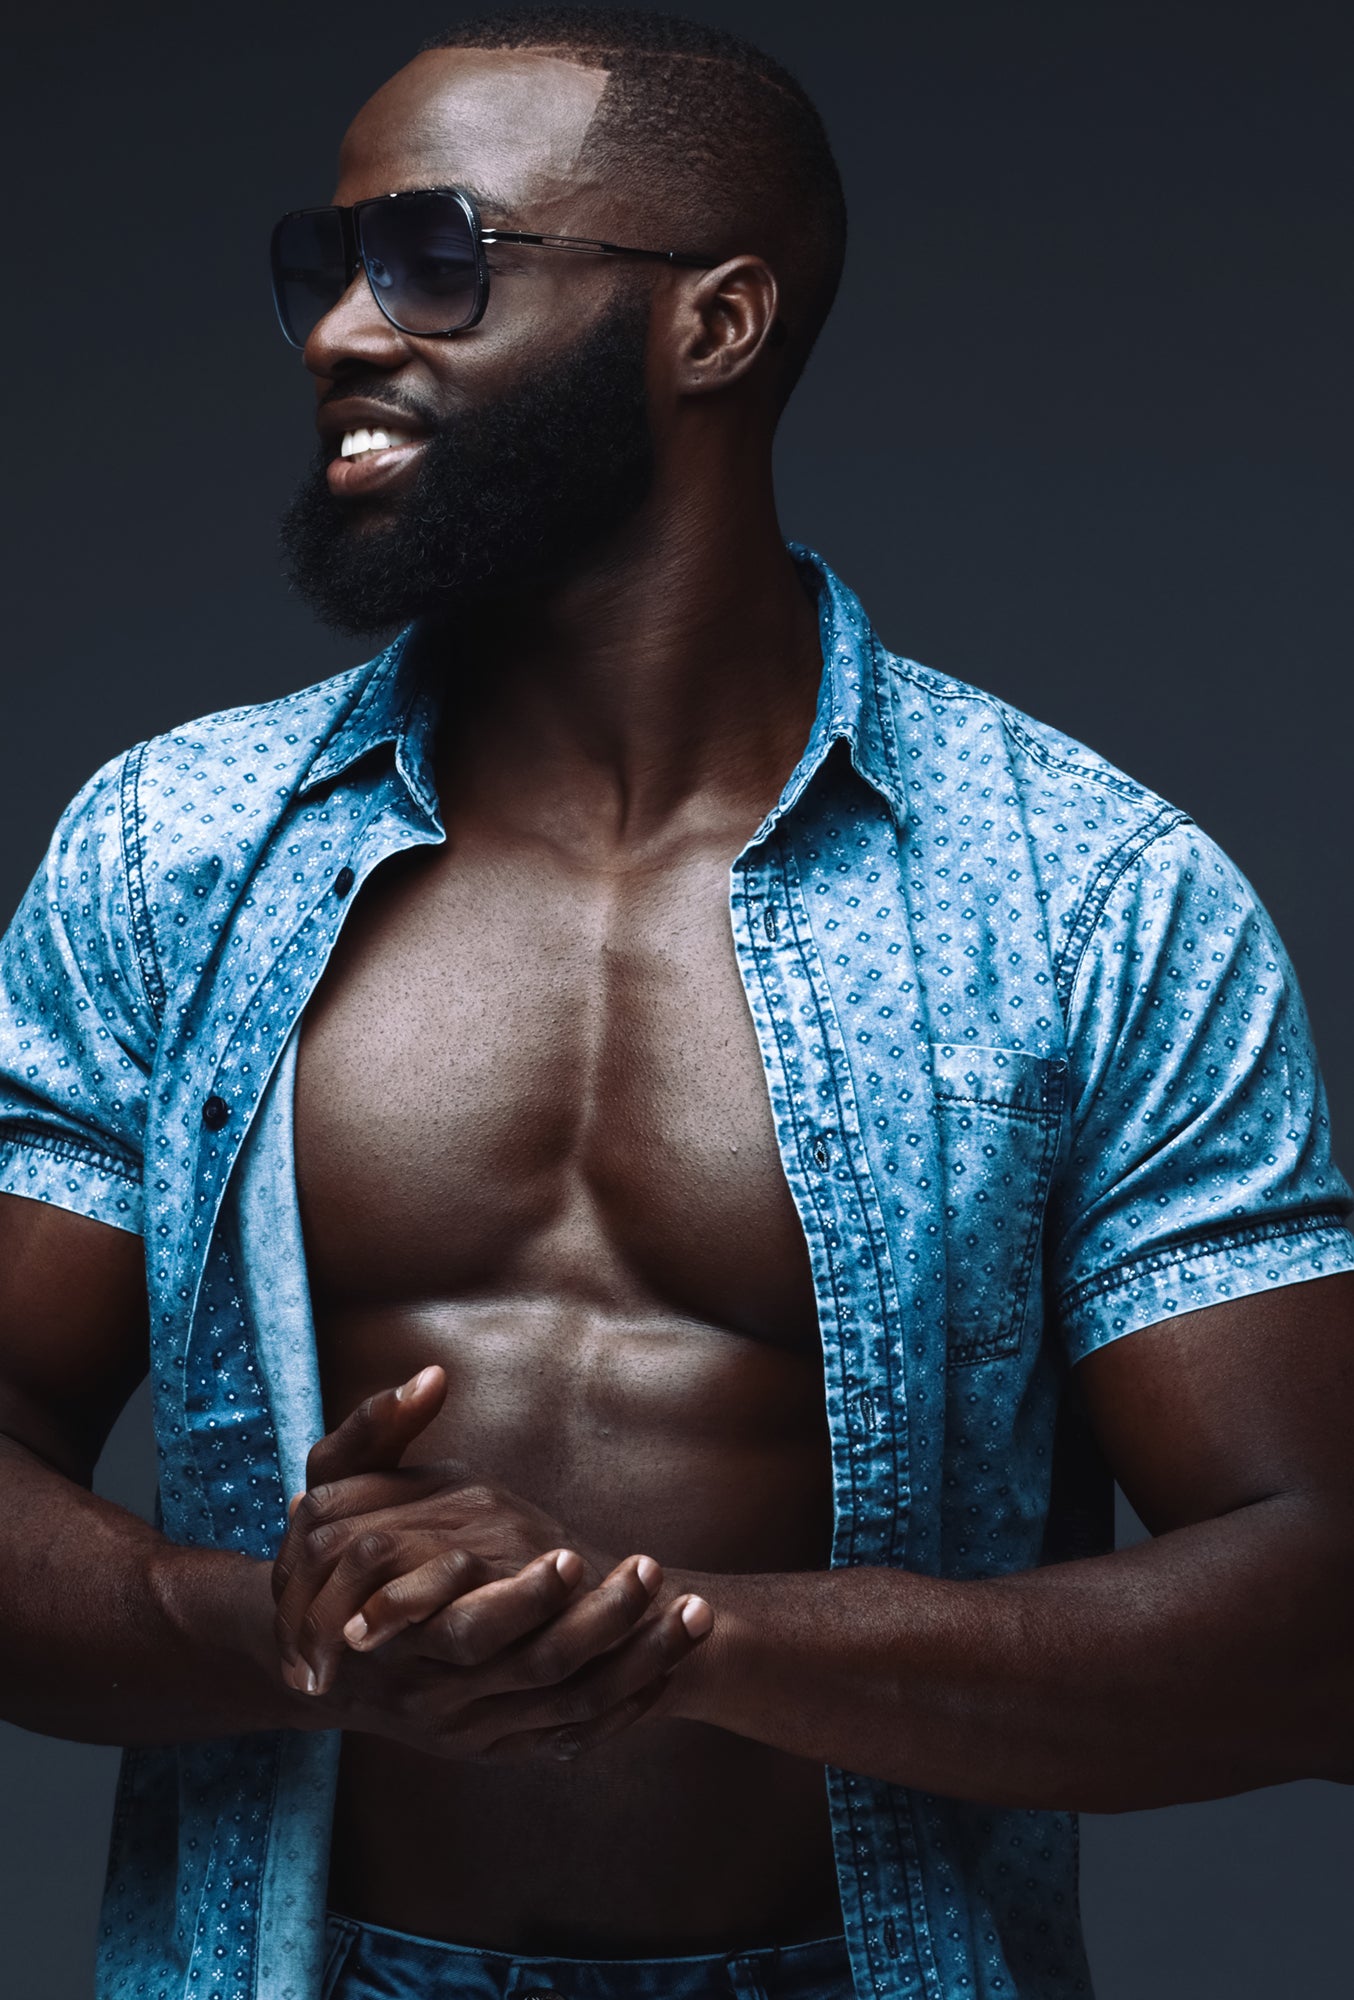 #MCM: Haitian Model Mcdonald Jean-Louis Is In the Running For The Hottest Chocolate Around
